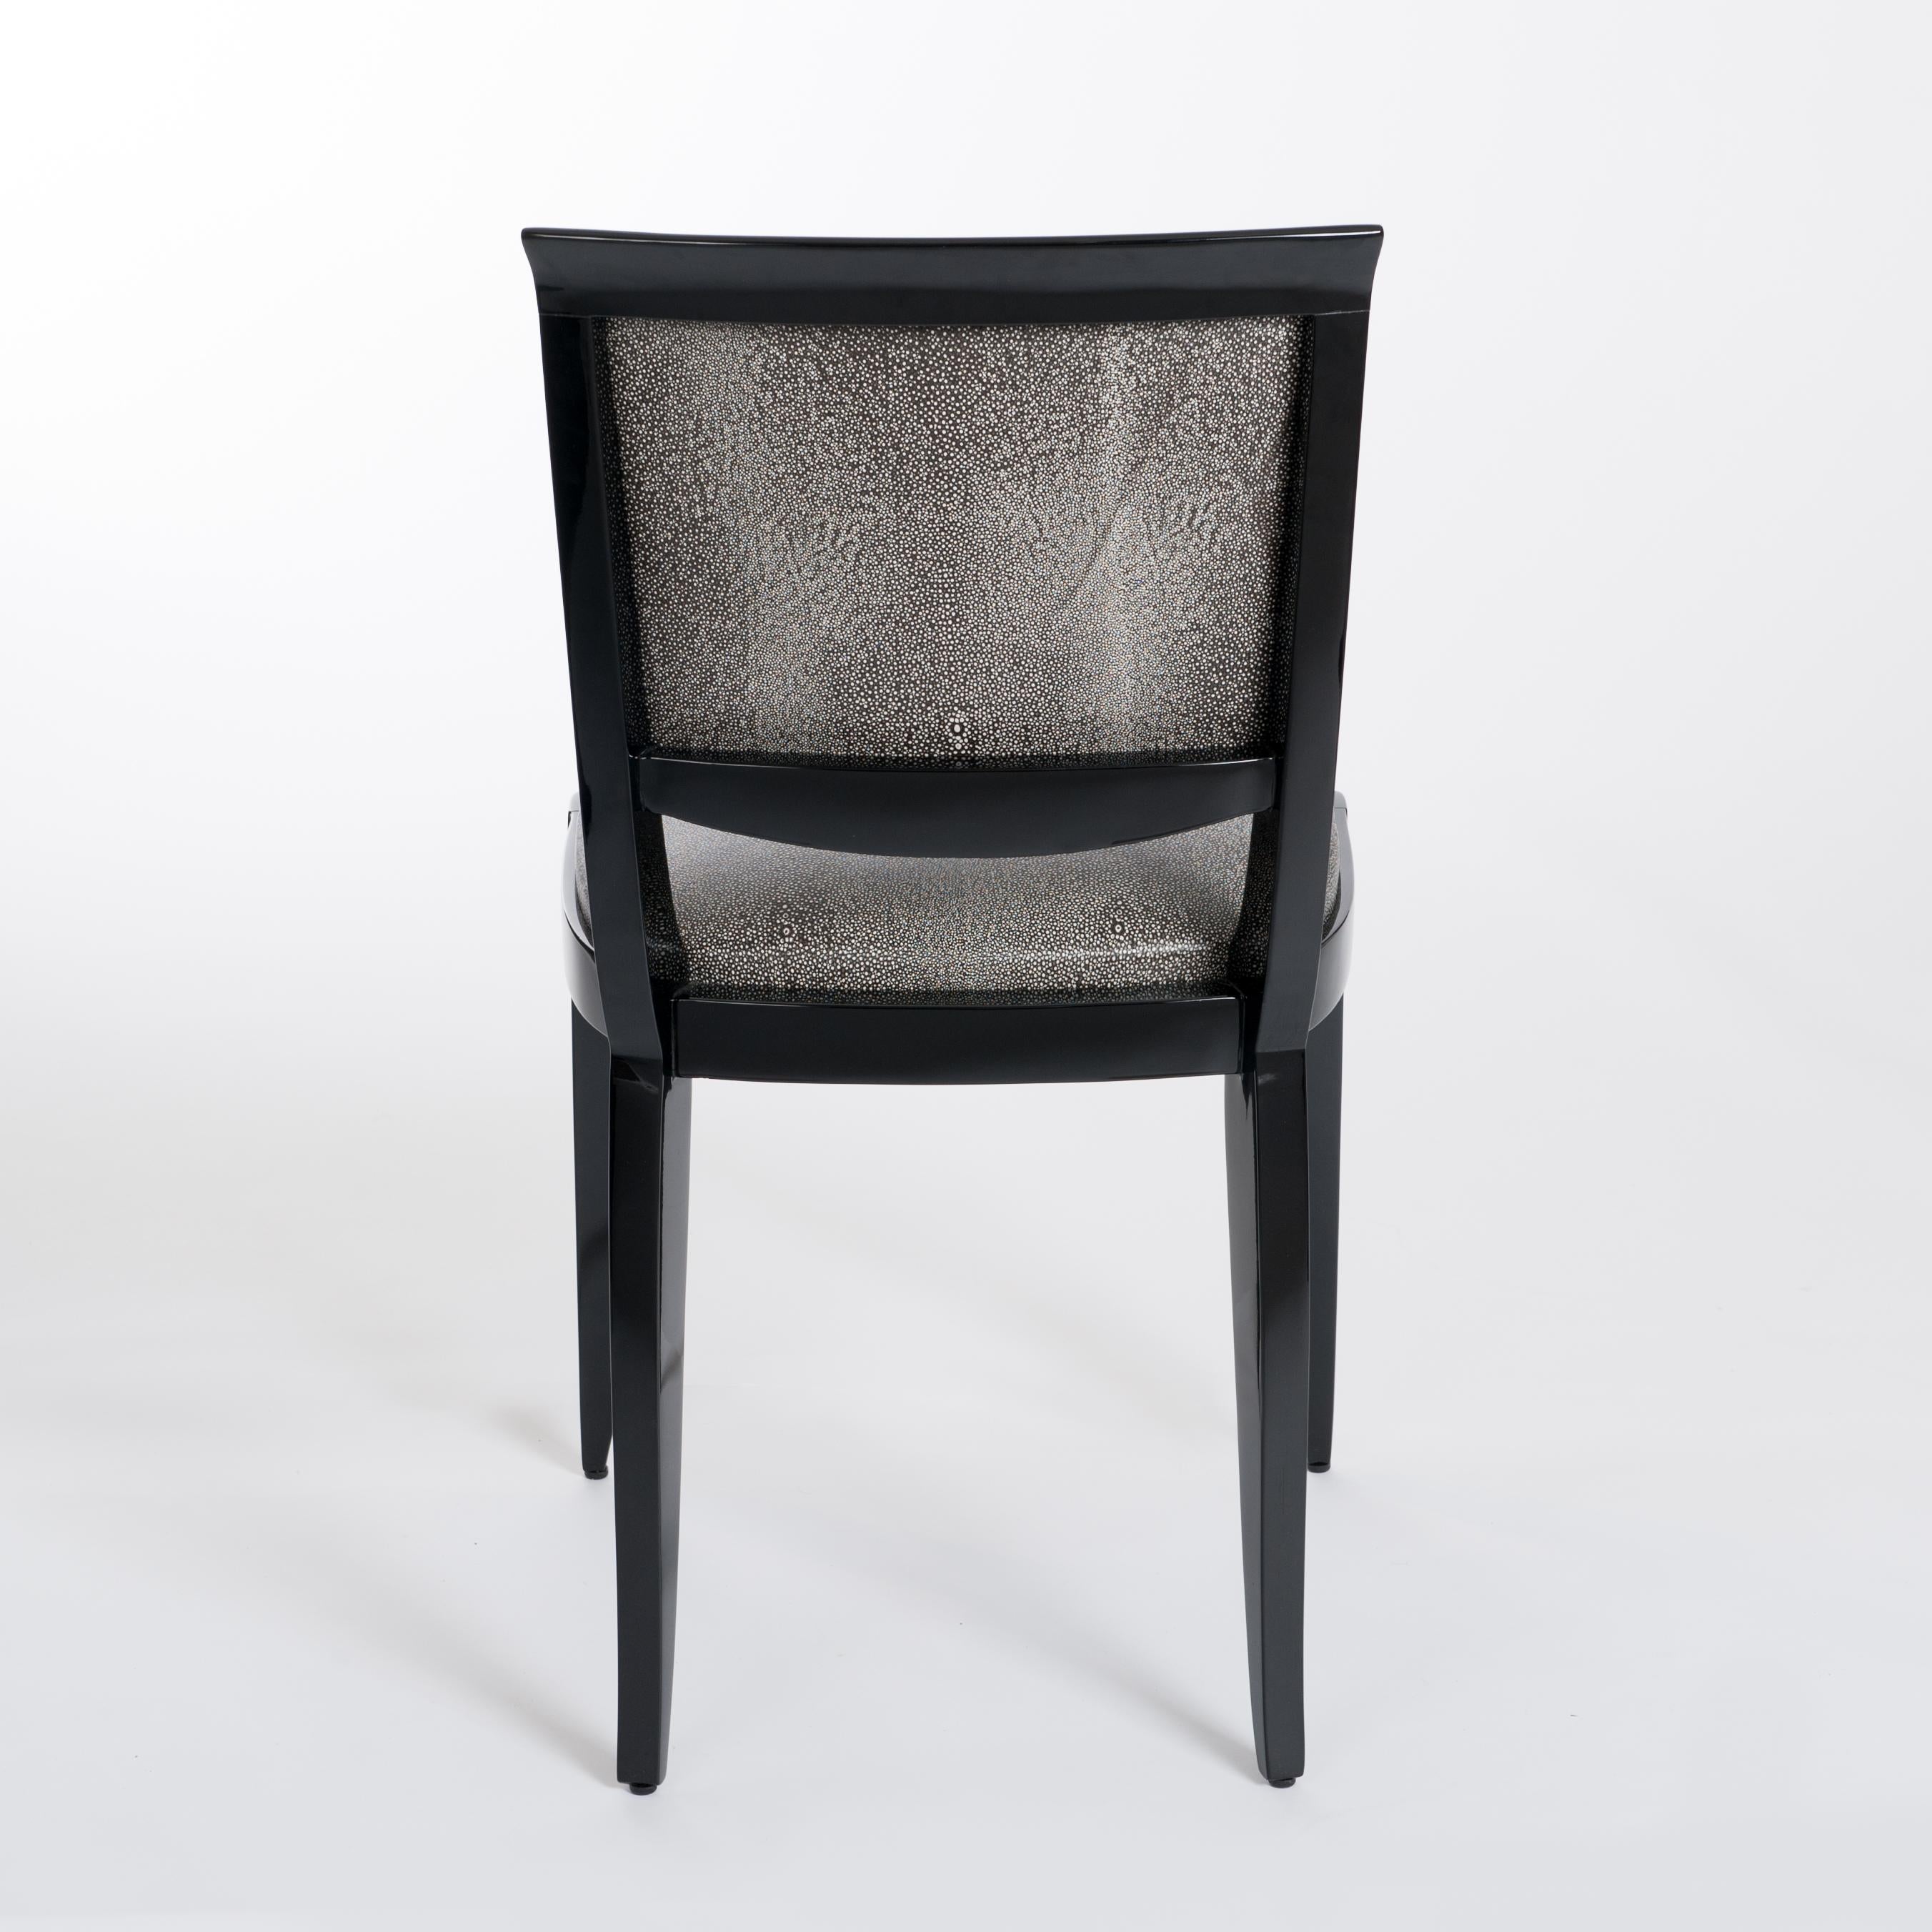 6 Black Art Déco Dining Room Chairs Black-White Raydesign Colored Leather 1930s In Good Condition For Sale In Salzburg, AT